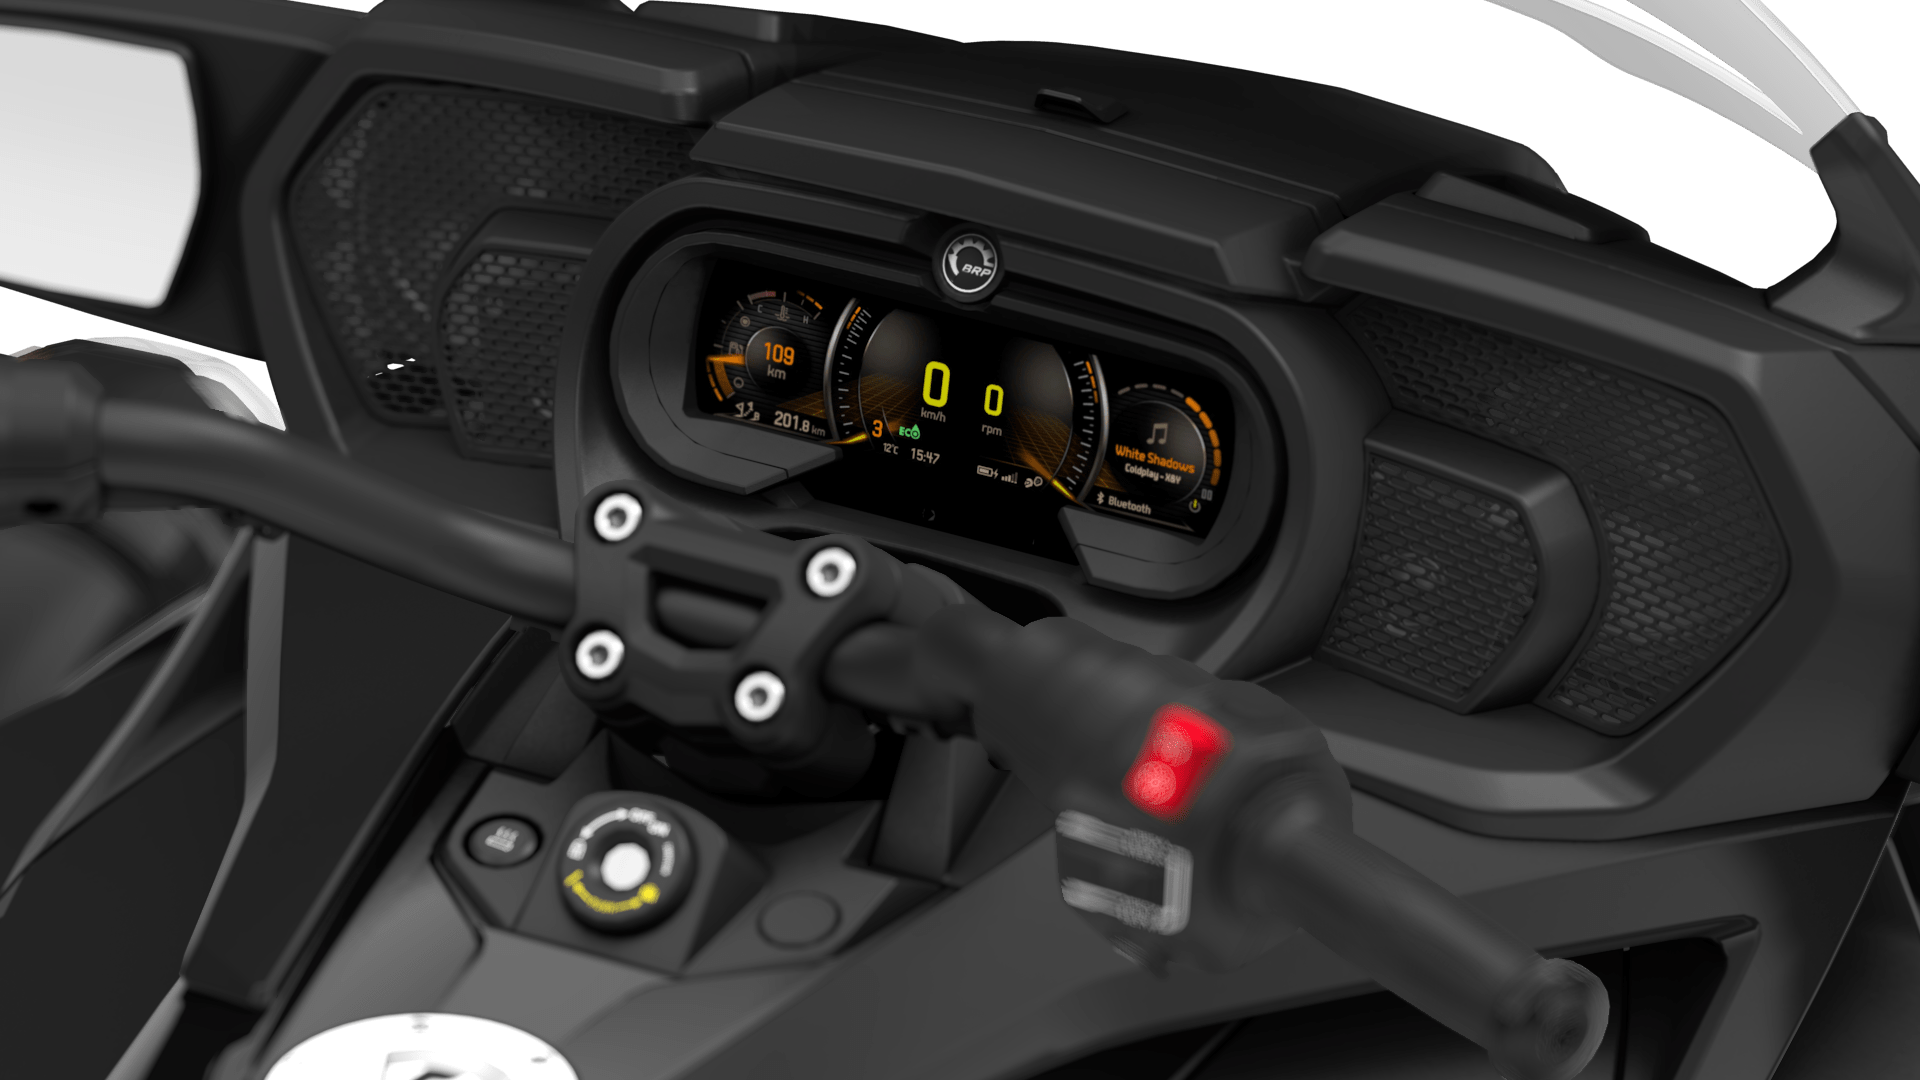 The driver’s seat view of a Can-Am Spyder vehicle’s console with Eco Mode Smart Assist activated.